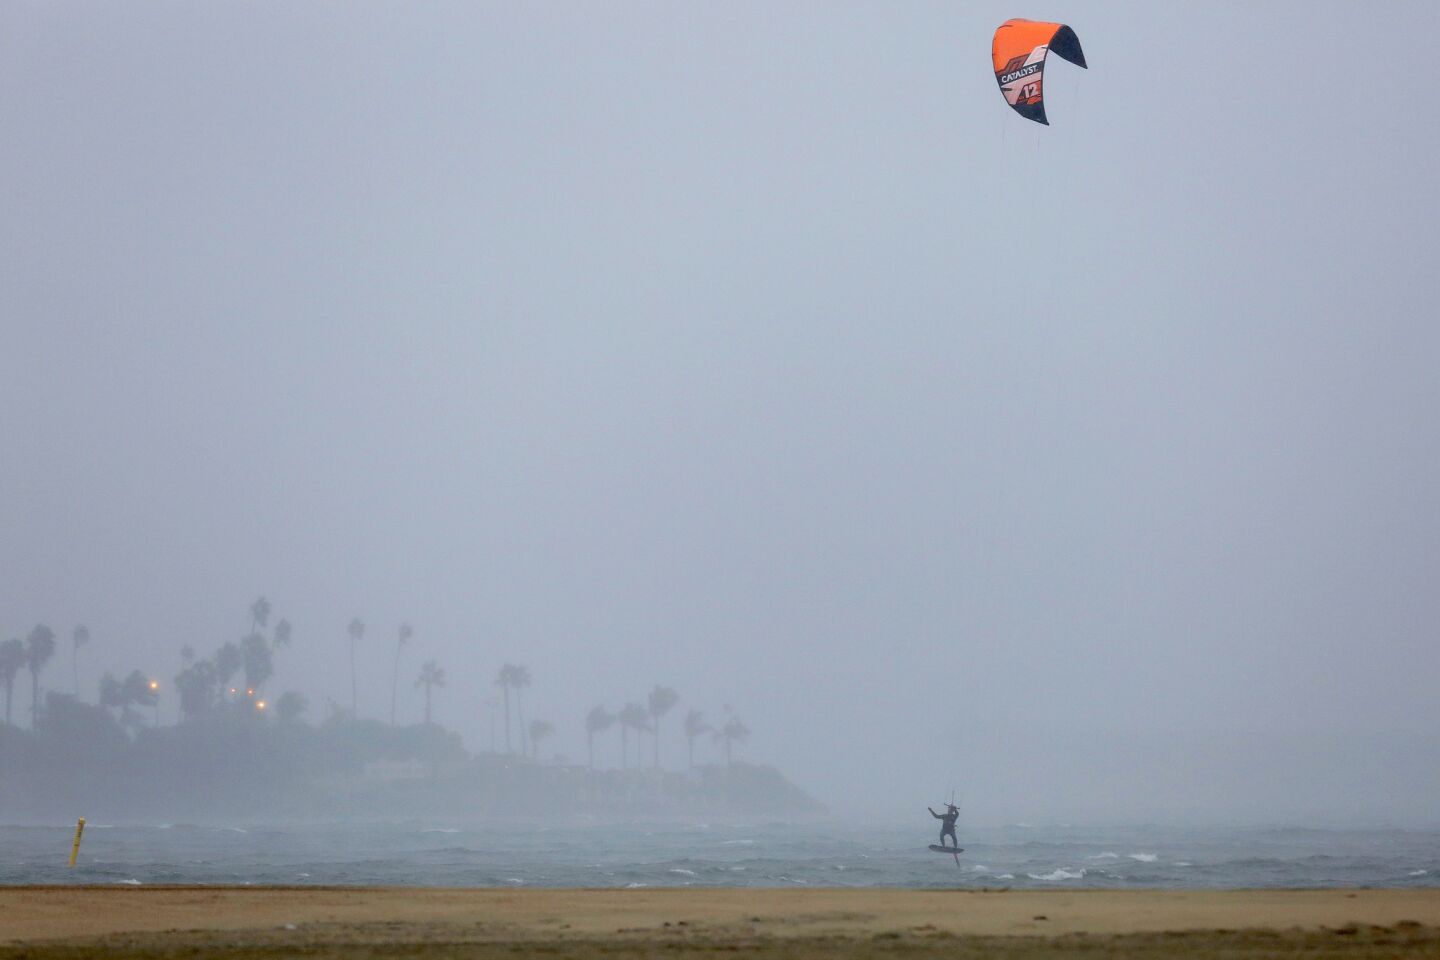 A kite surfer in Long Beach makes use of the wind during the rainy weather brought by the first big storm of the new year.